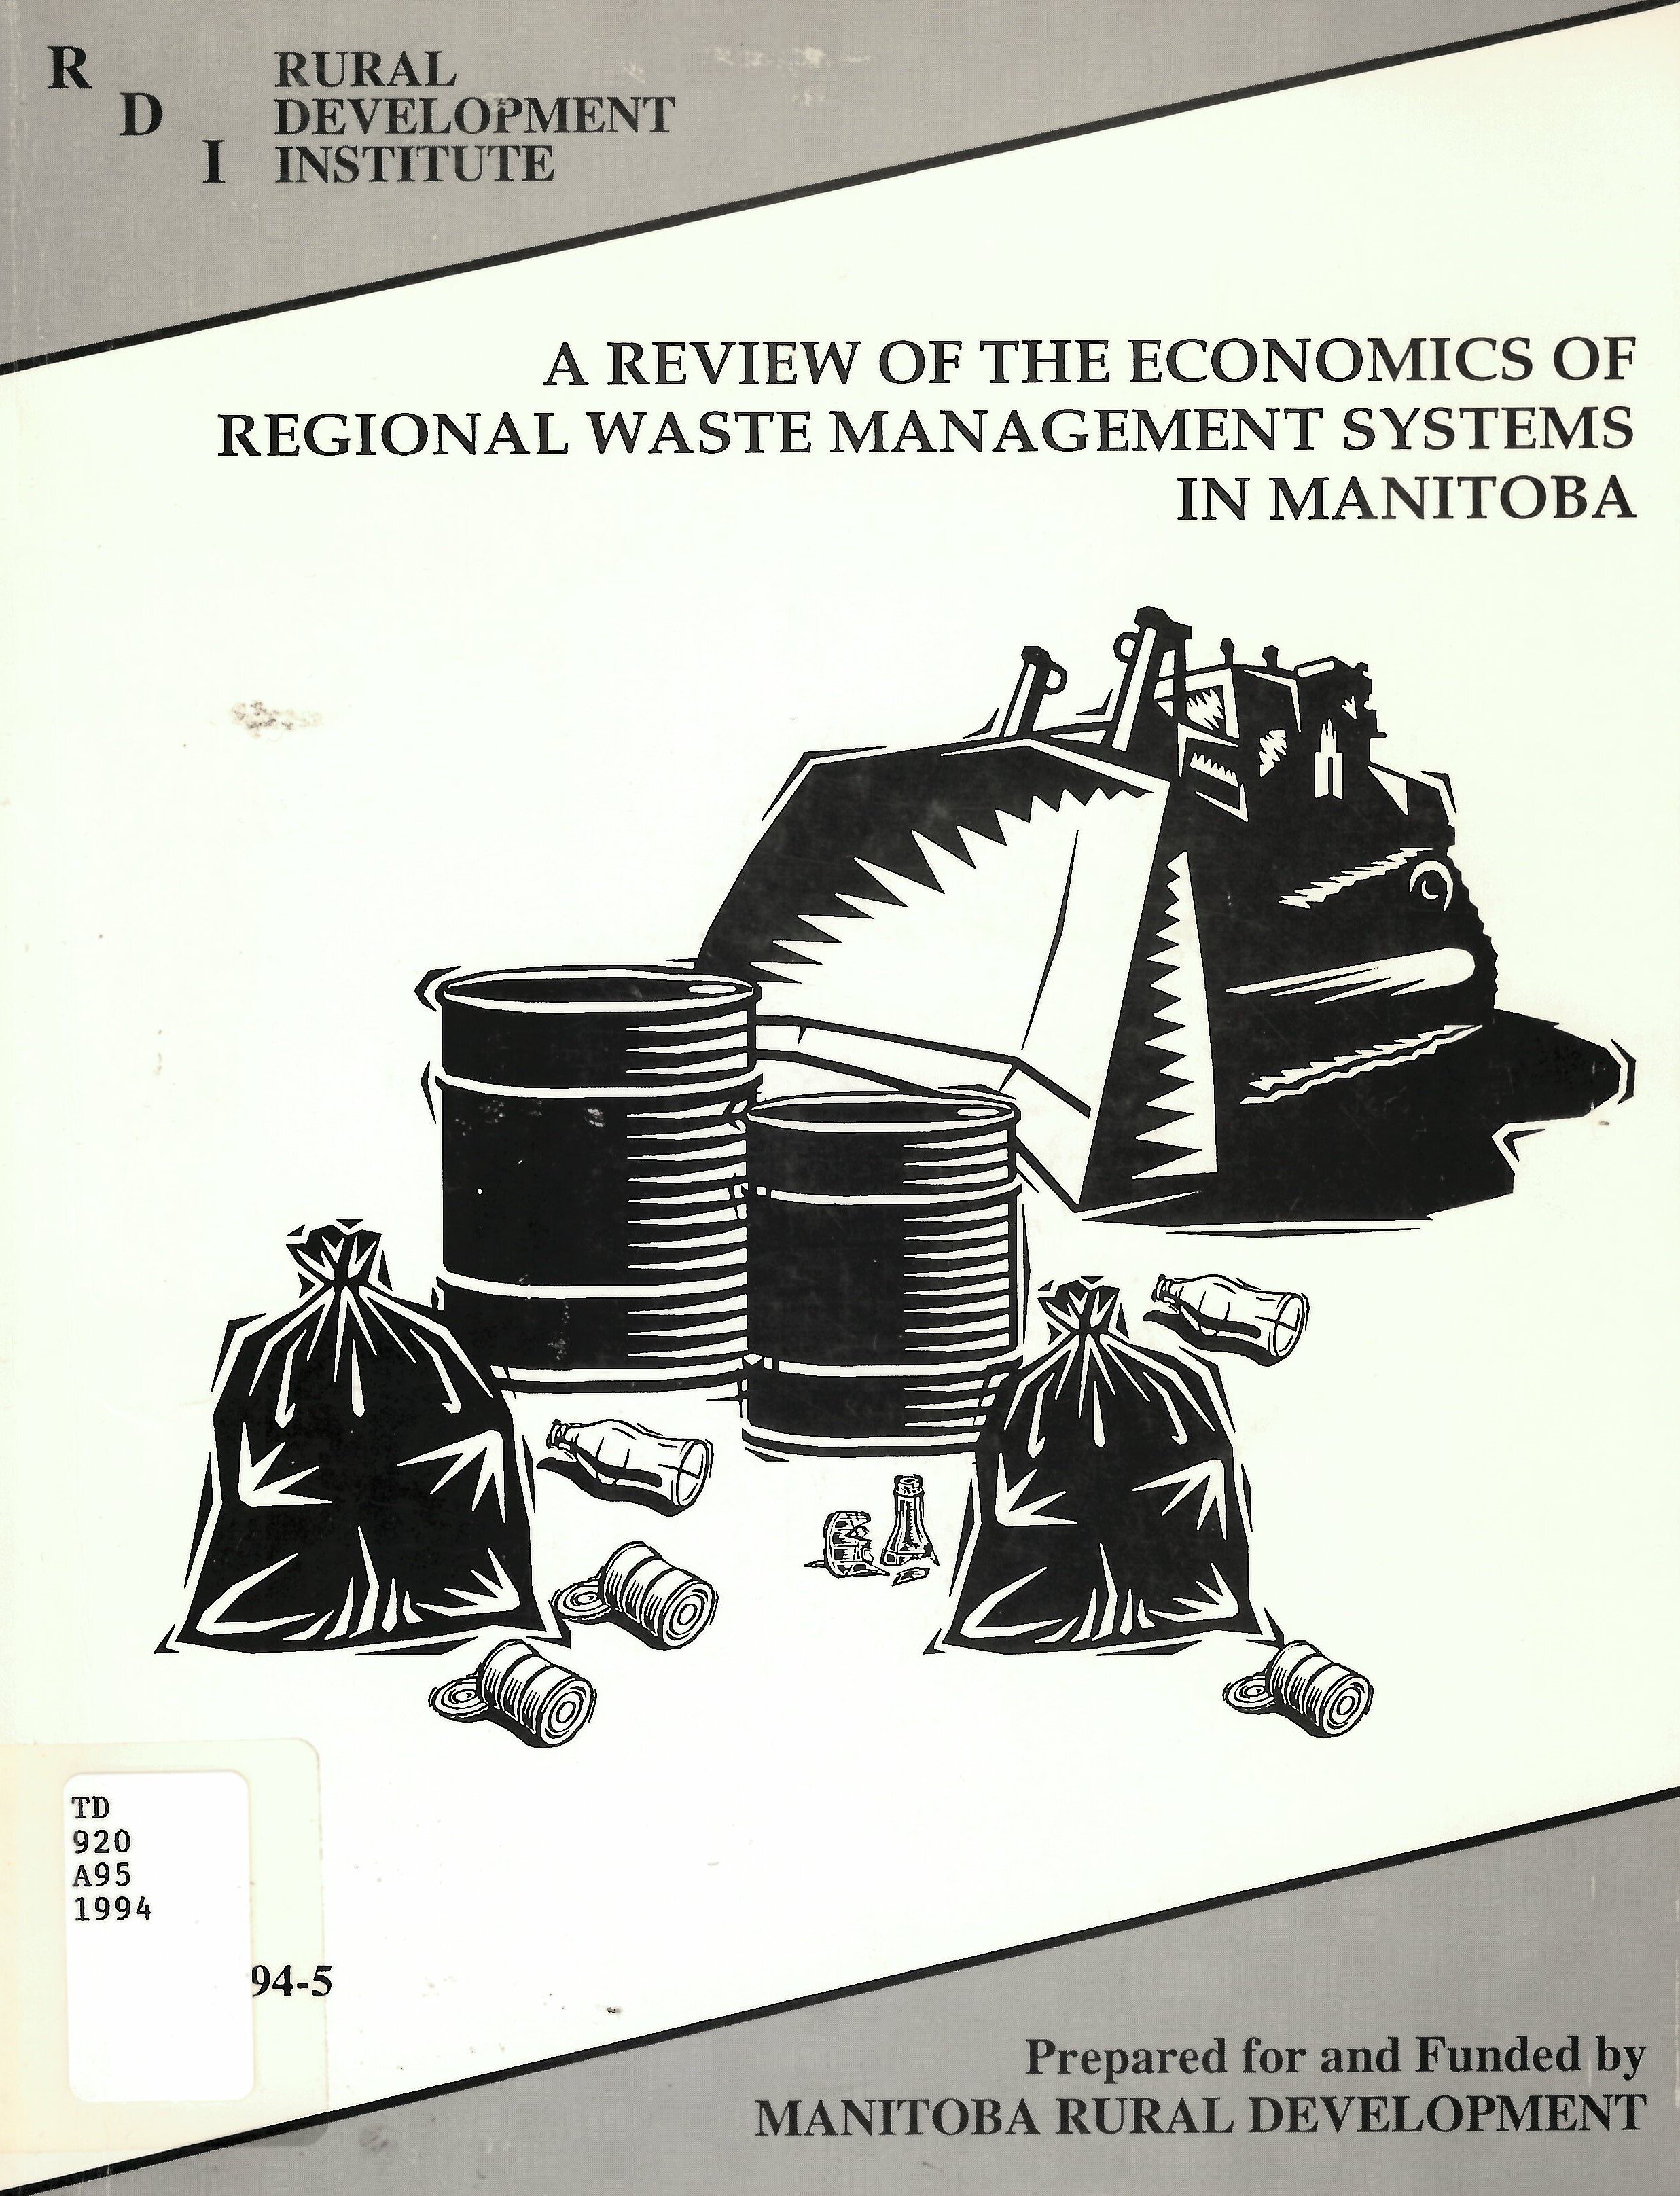 A review of the economics of regional waste management systems in Manitoba